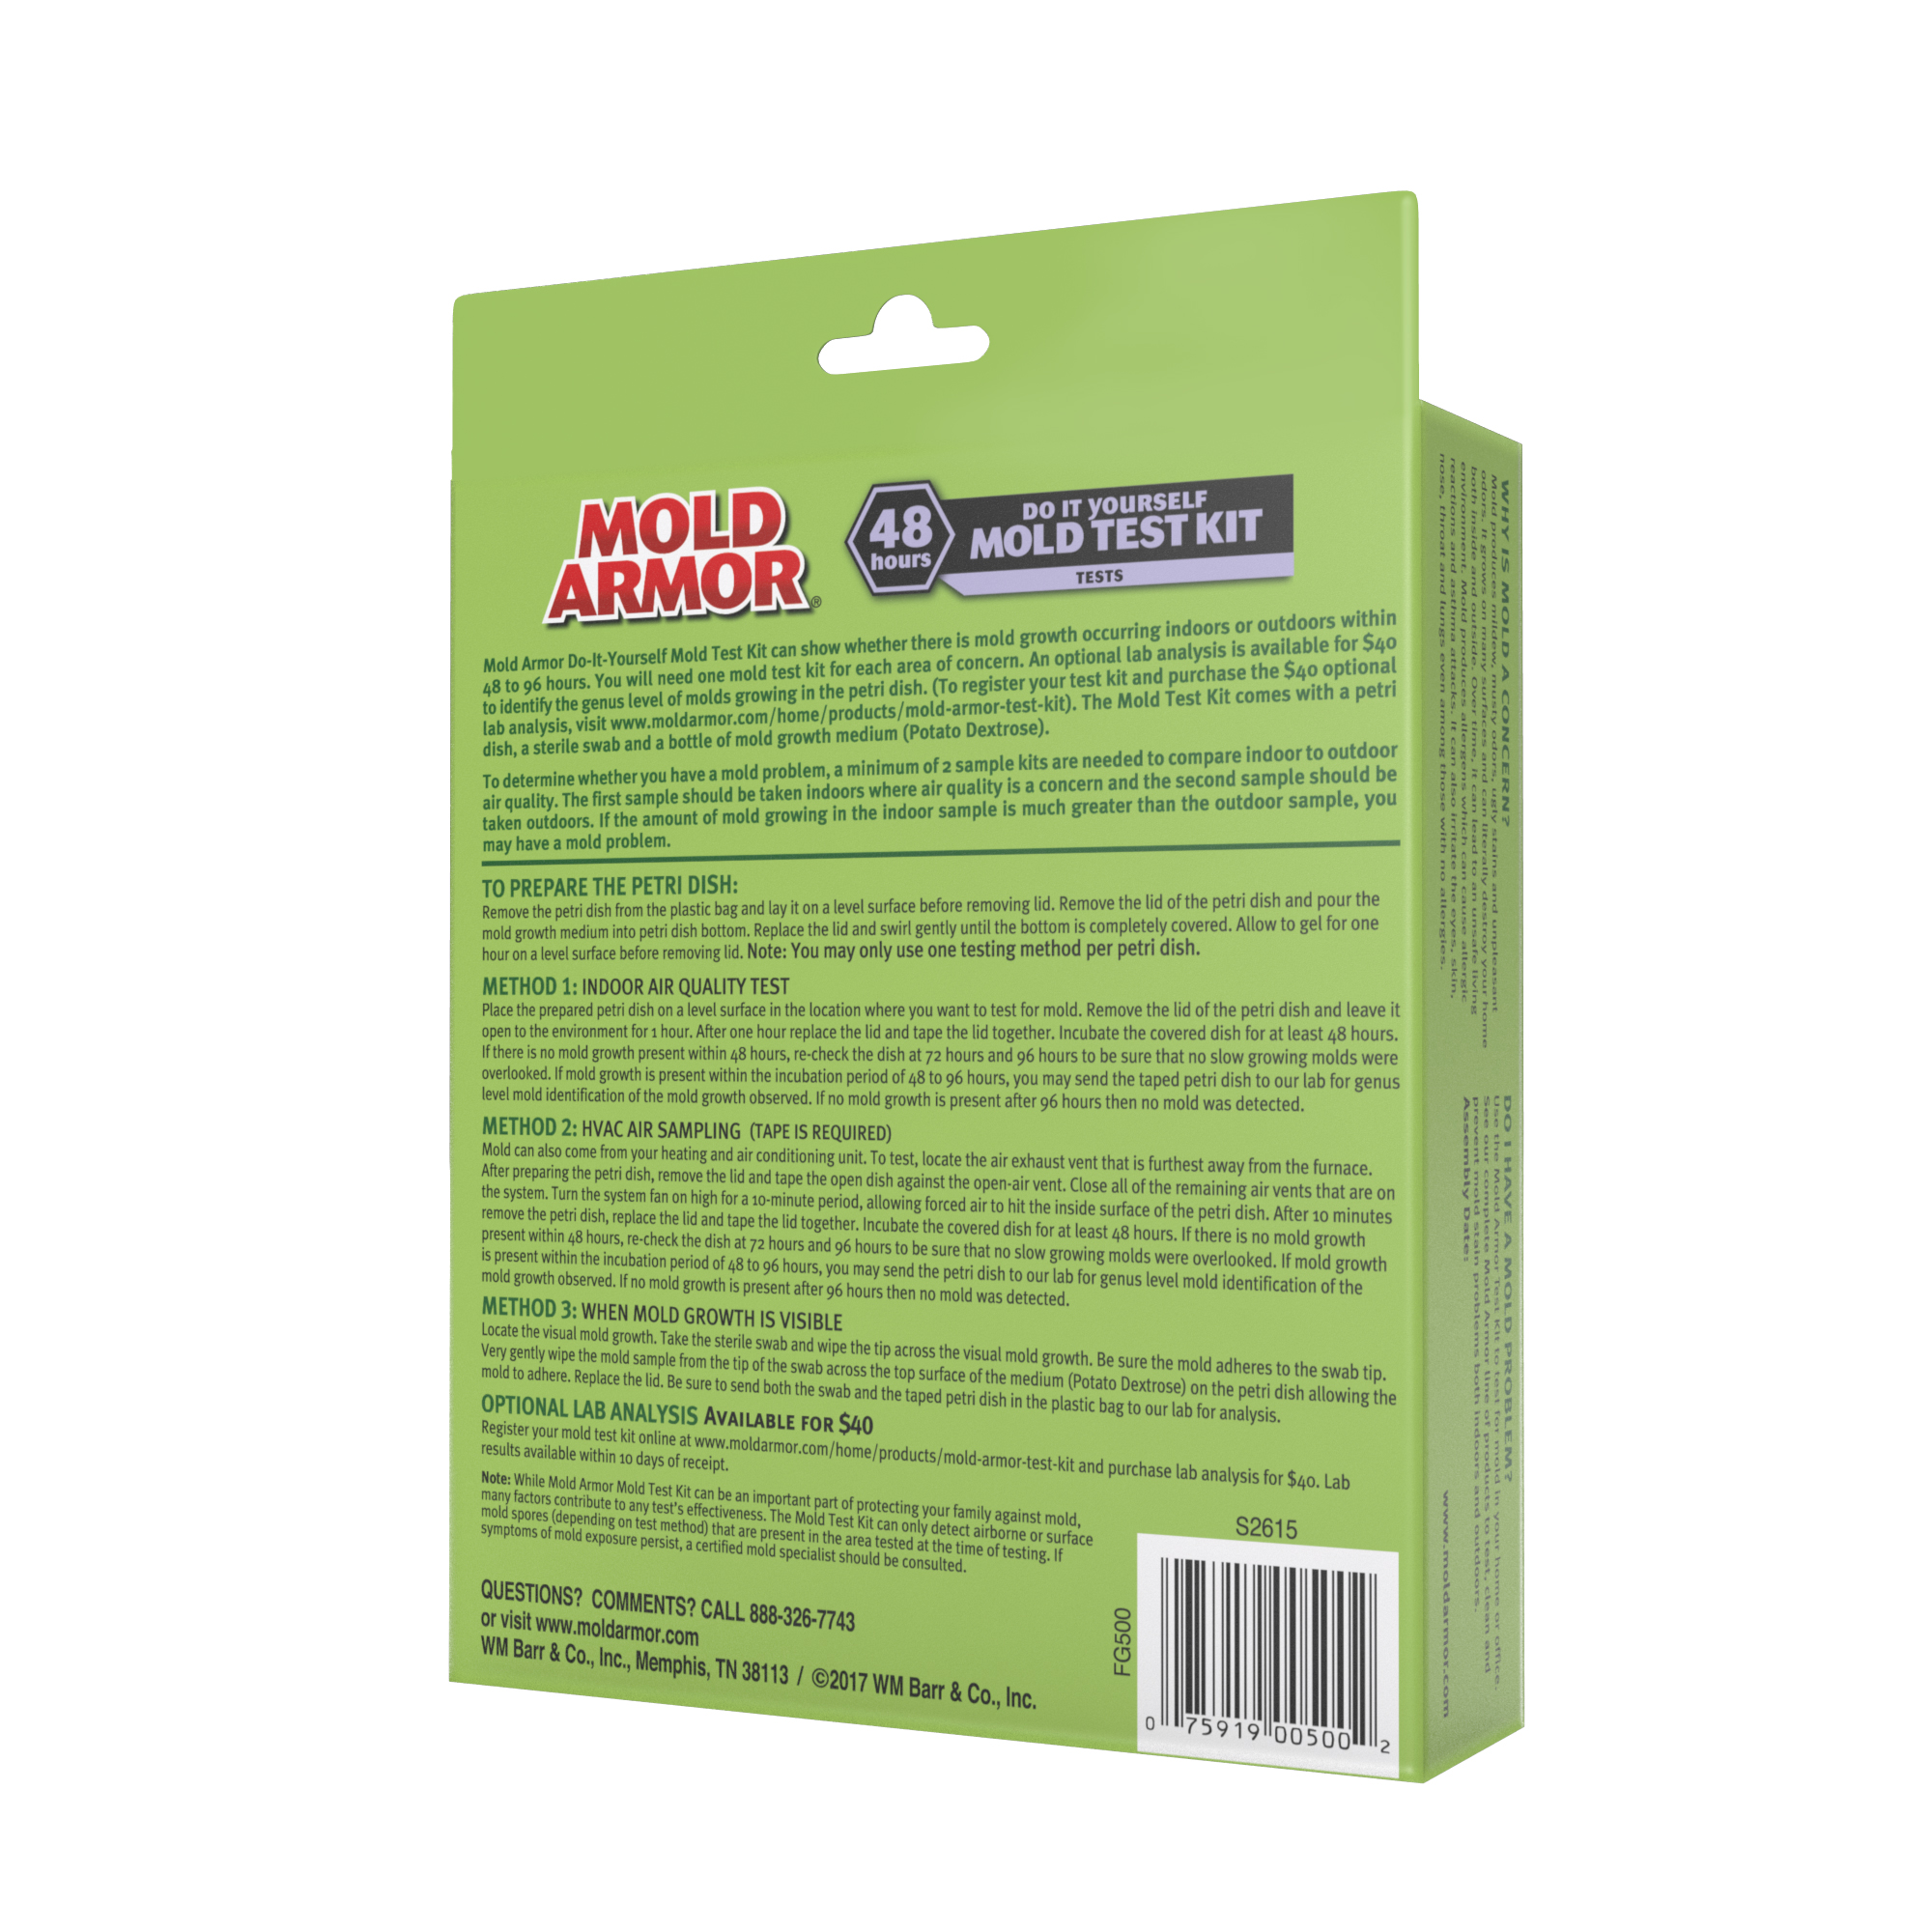 DIY Mold Test Kit for Home, 48-Hour Visible Results, Air & Surface Mold Analysis - Complete Lab Assessment and Professional Consultation Included